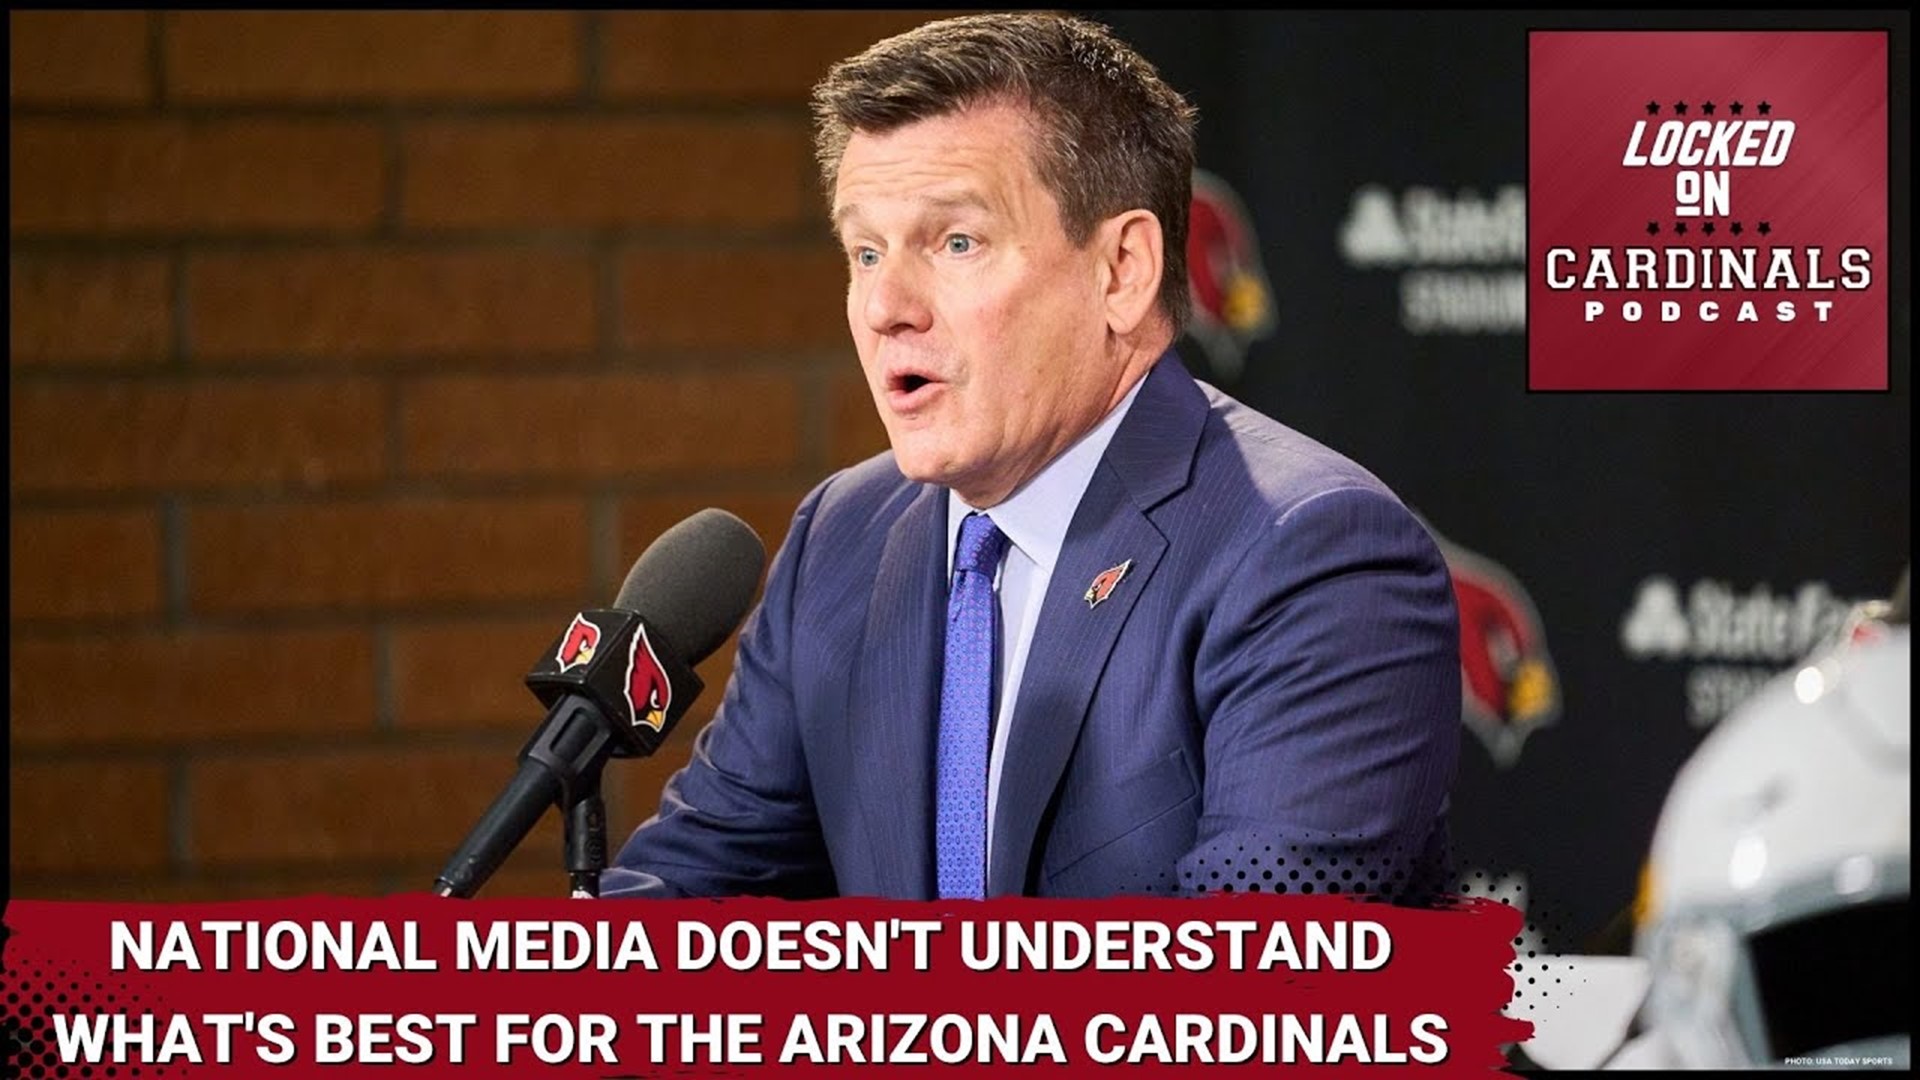 Arizona Cardinals have been dormant this offseason and this free agency period so far has been one that's forming this organization for the future.